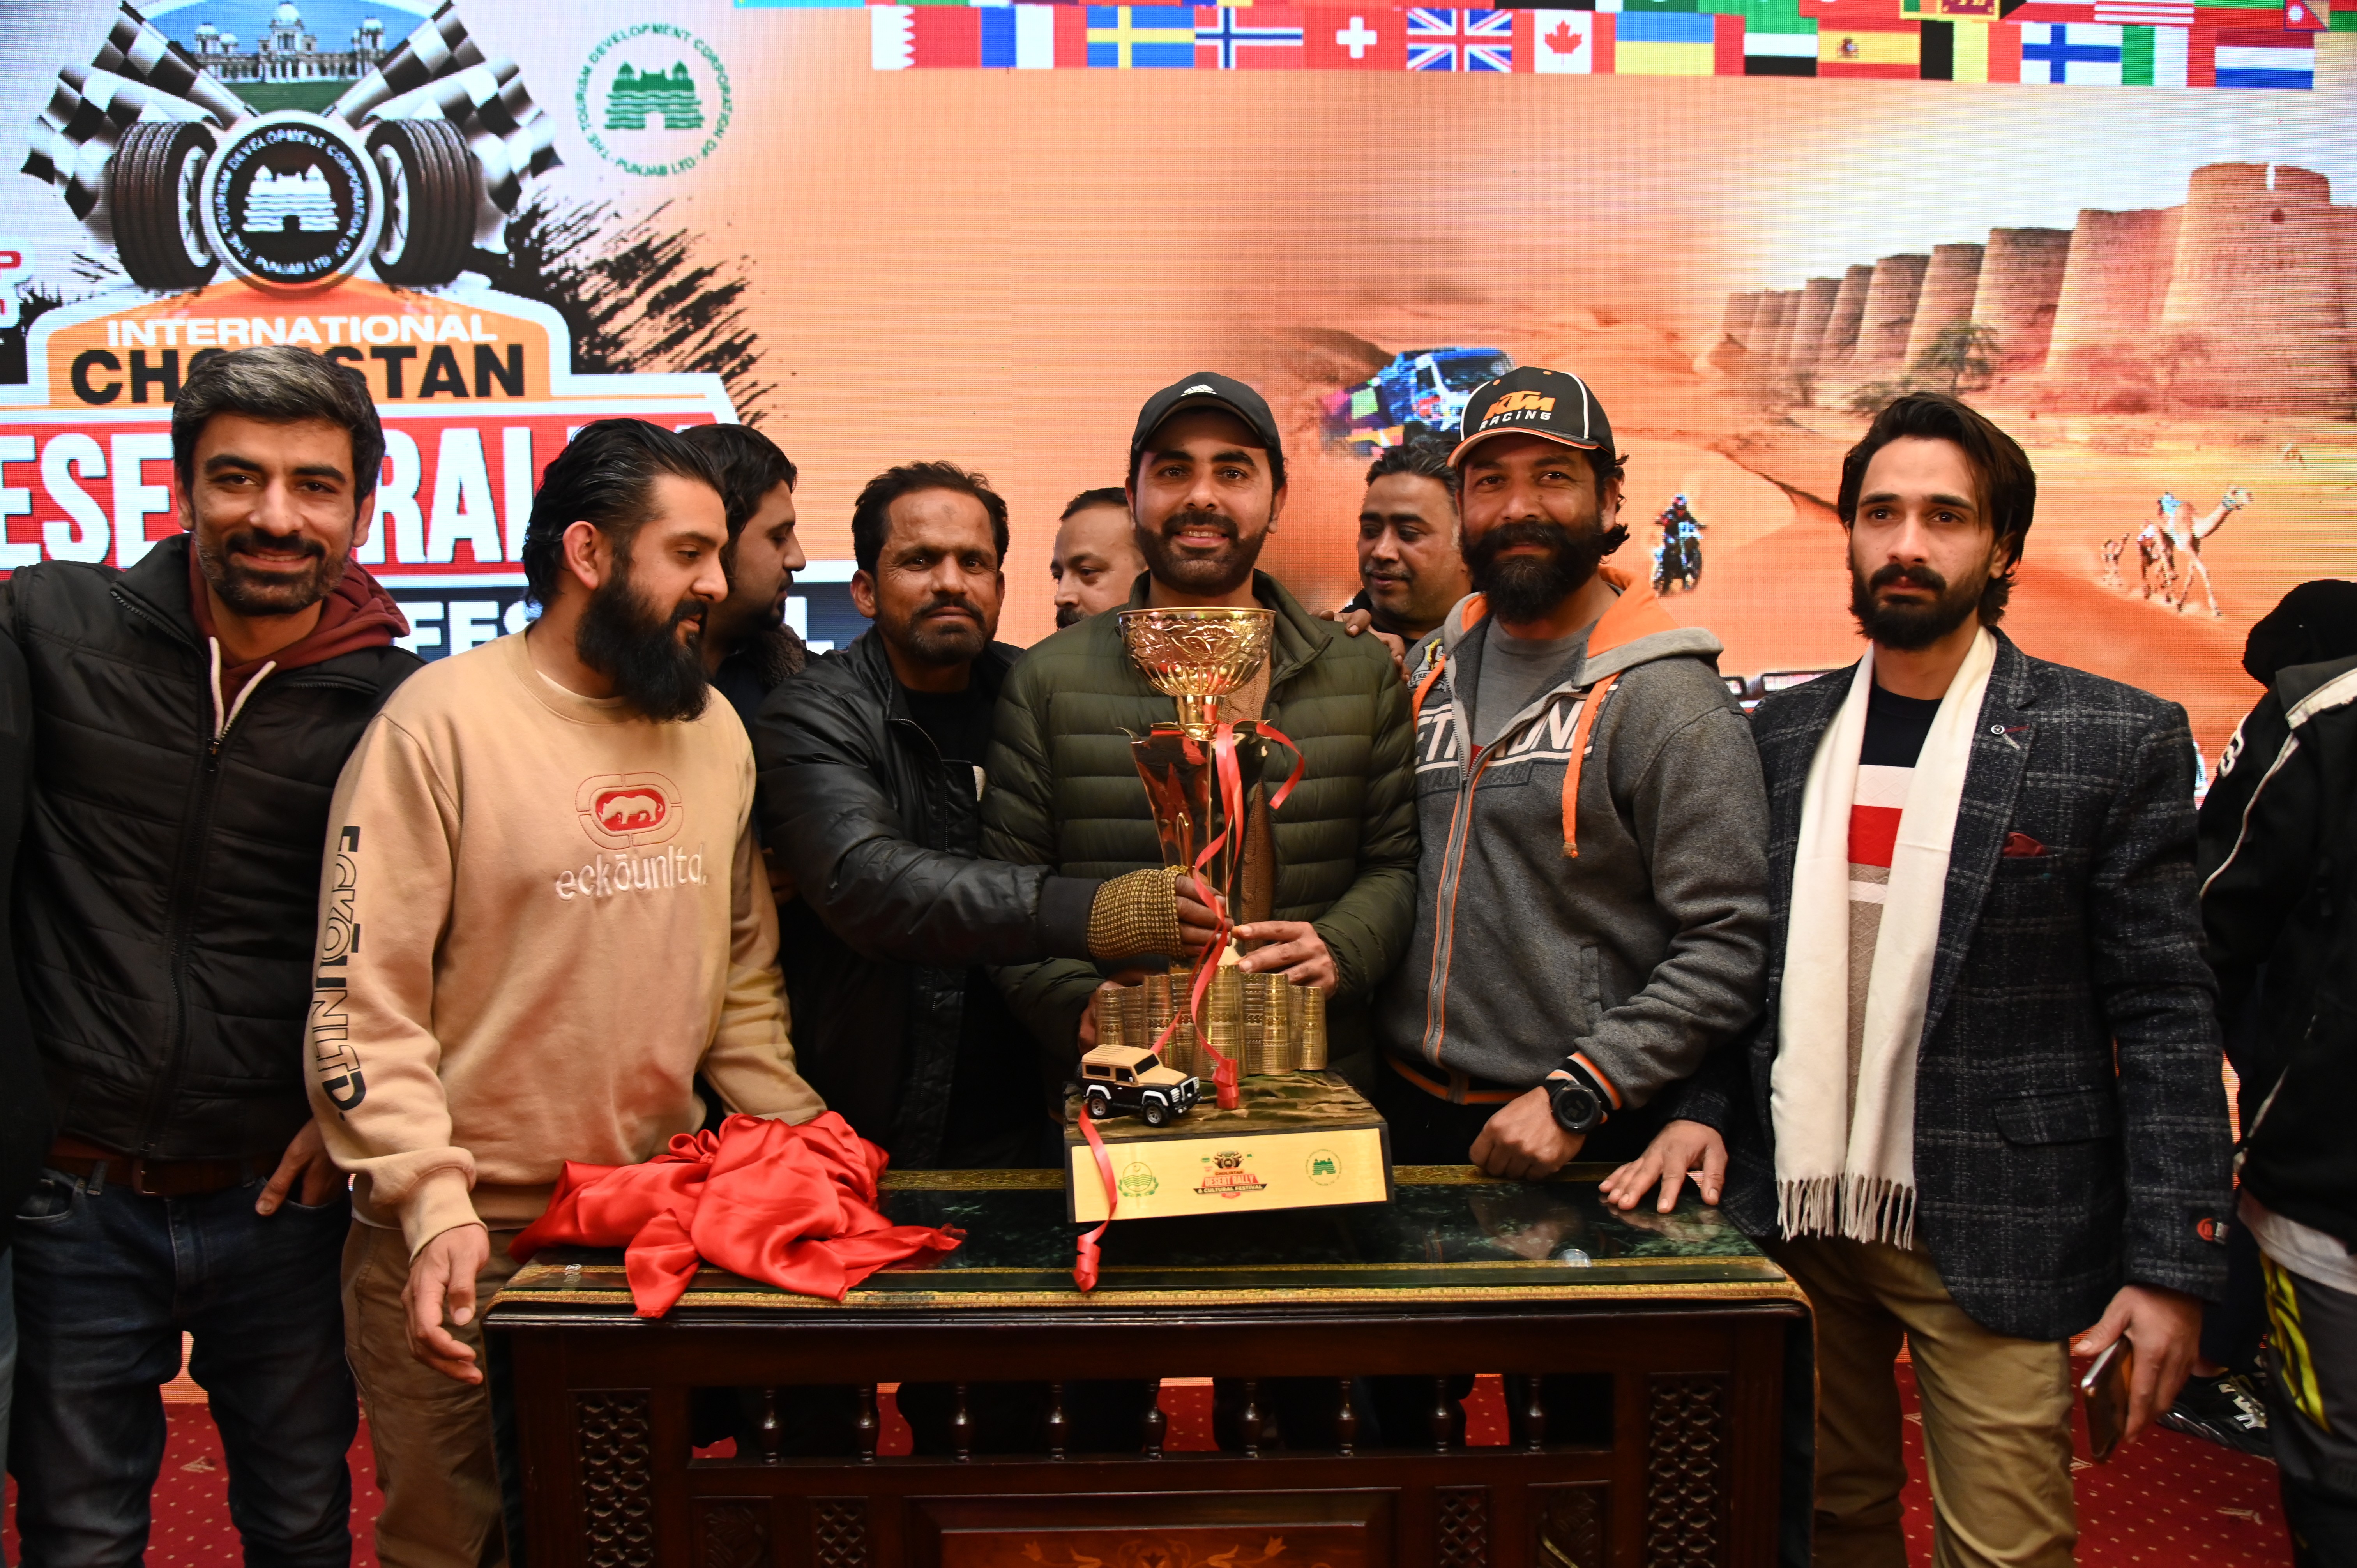 A group photo of  the participants with the trophy